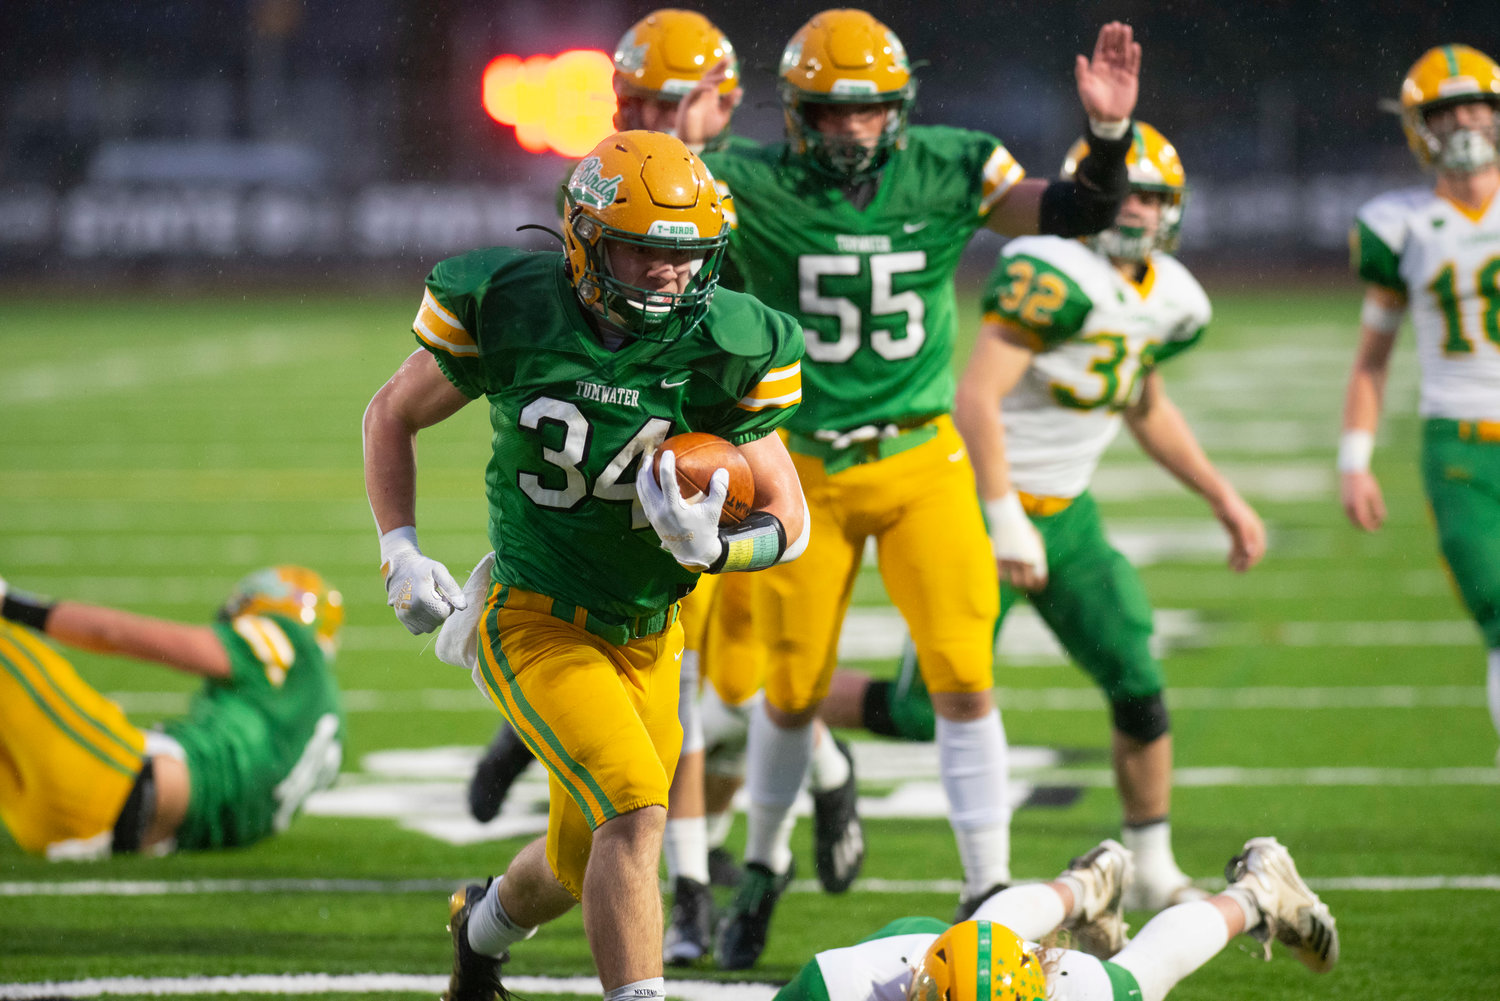 Tumwater’s Payton Hoyt (34) rushes for a 21-yard touchdown in the first quarter of the 2A state title game against Lynden on Dec. 4.